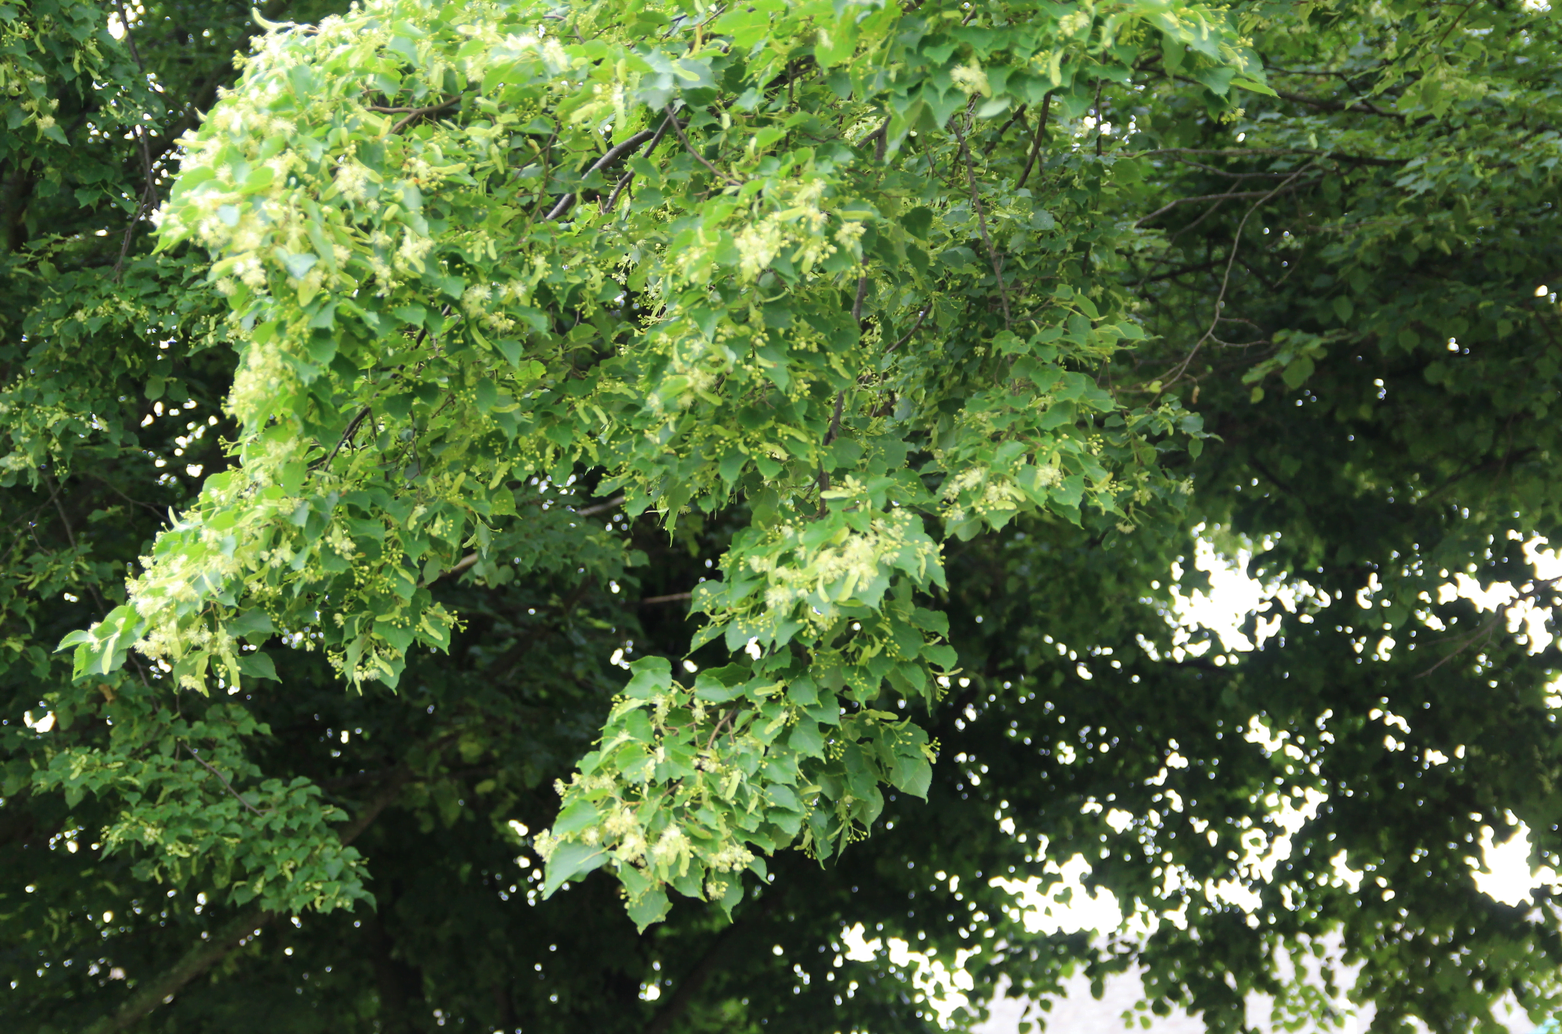 Close up of flowering Linden tree at Hamilton Avenue School. June 20, 2019 Photo: Leslie Yager